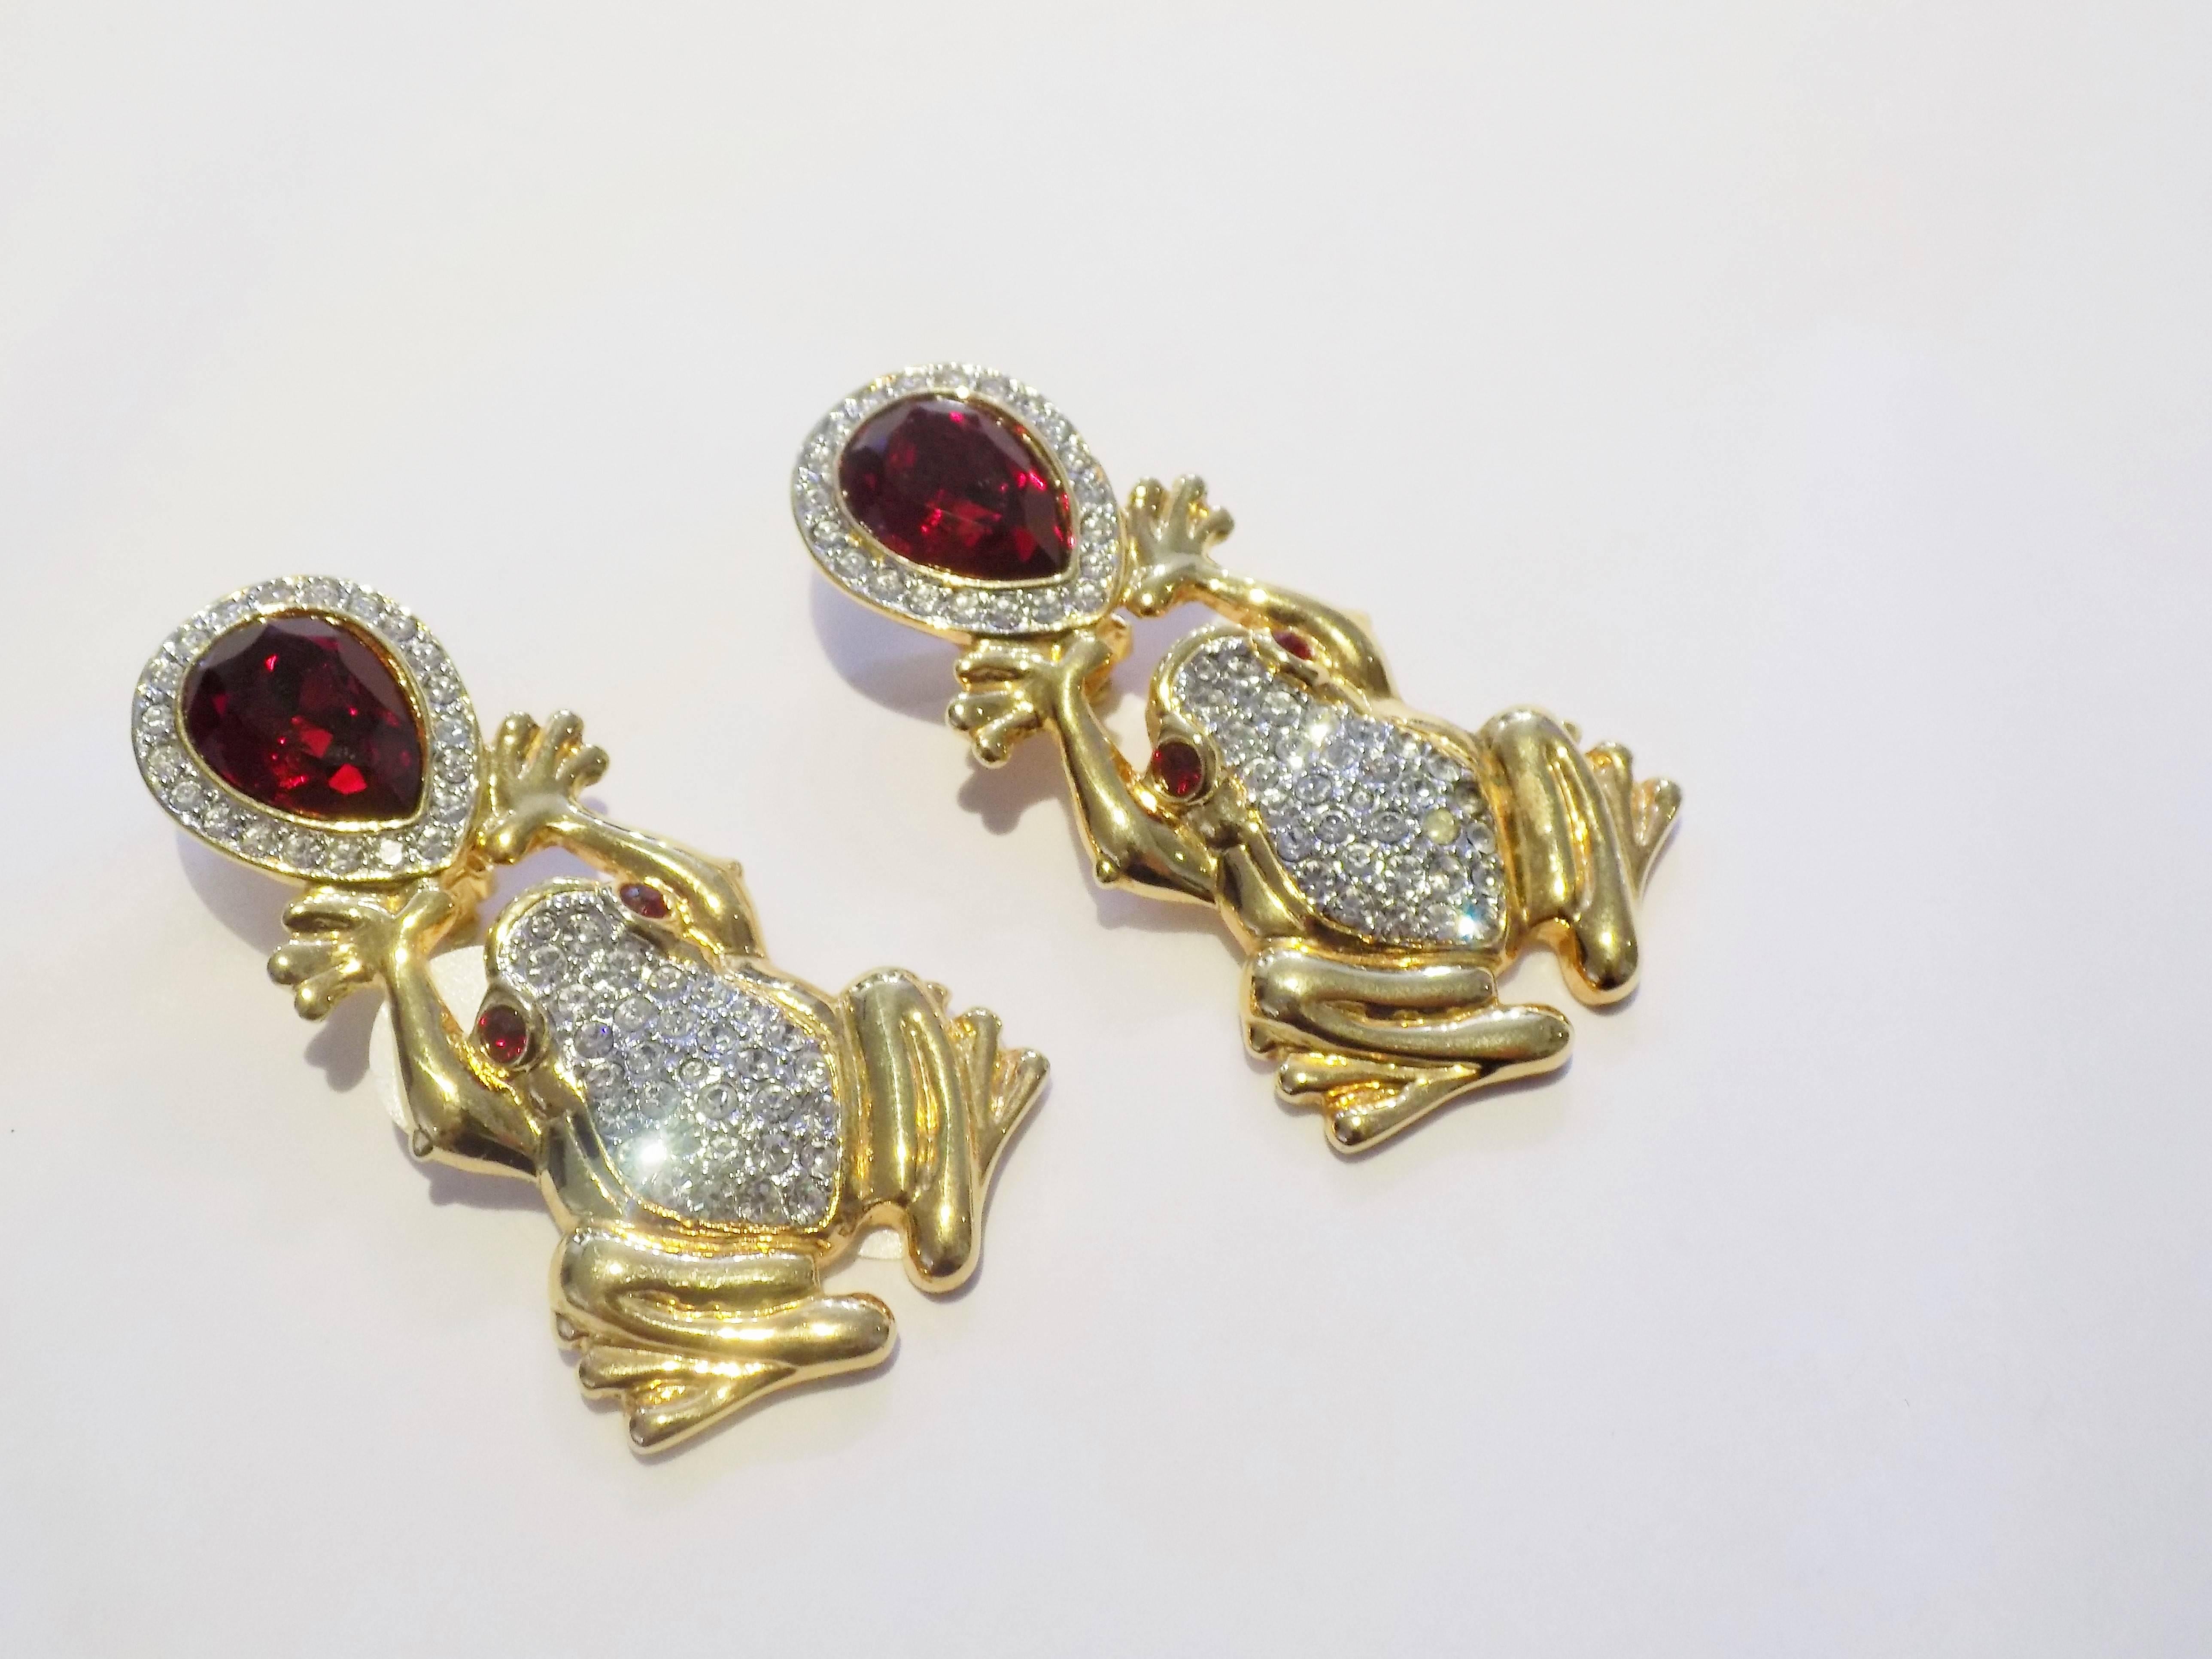 Spectacular Valentino Vintage frog earrings. Gold tone metal with clear crystals simulating diamonds with red eyes  holding pear shaped large red crystal as ruby. Earrings are Clips and they measure approx 3" of which  frog is 2" and earr